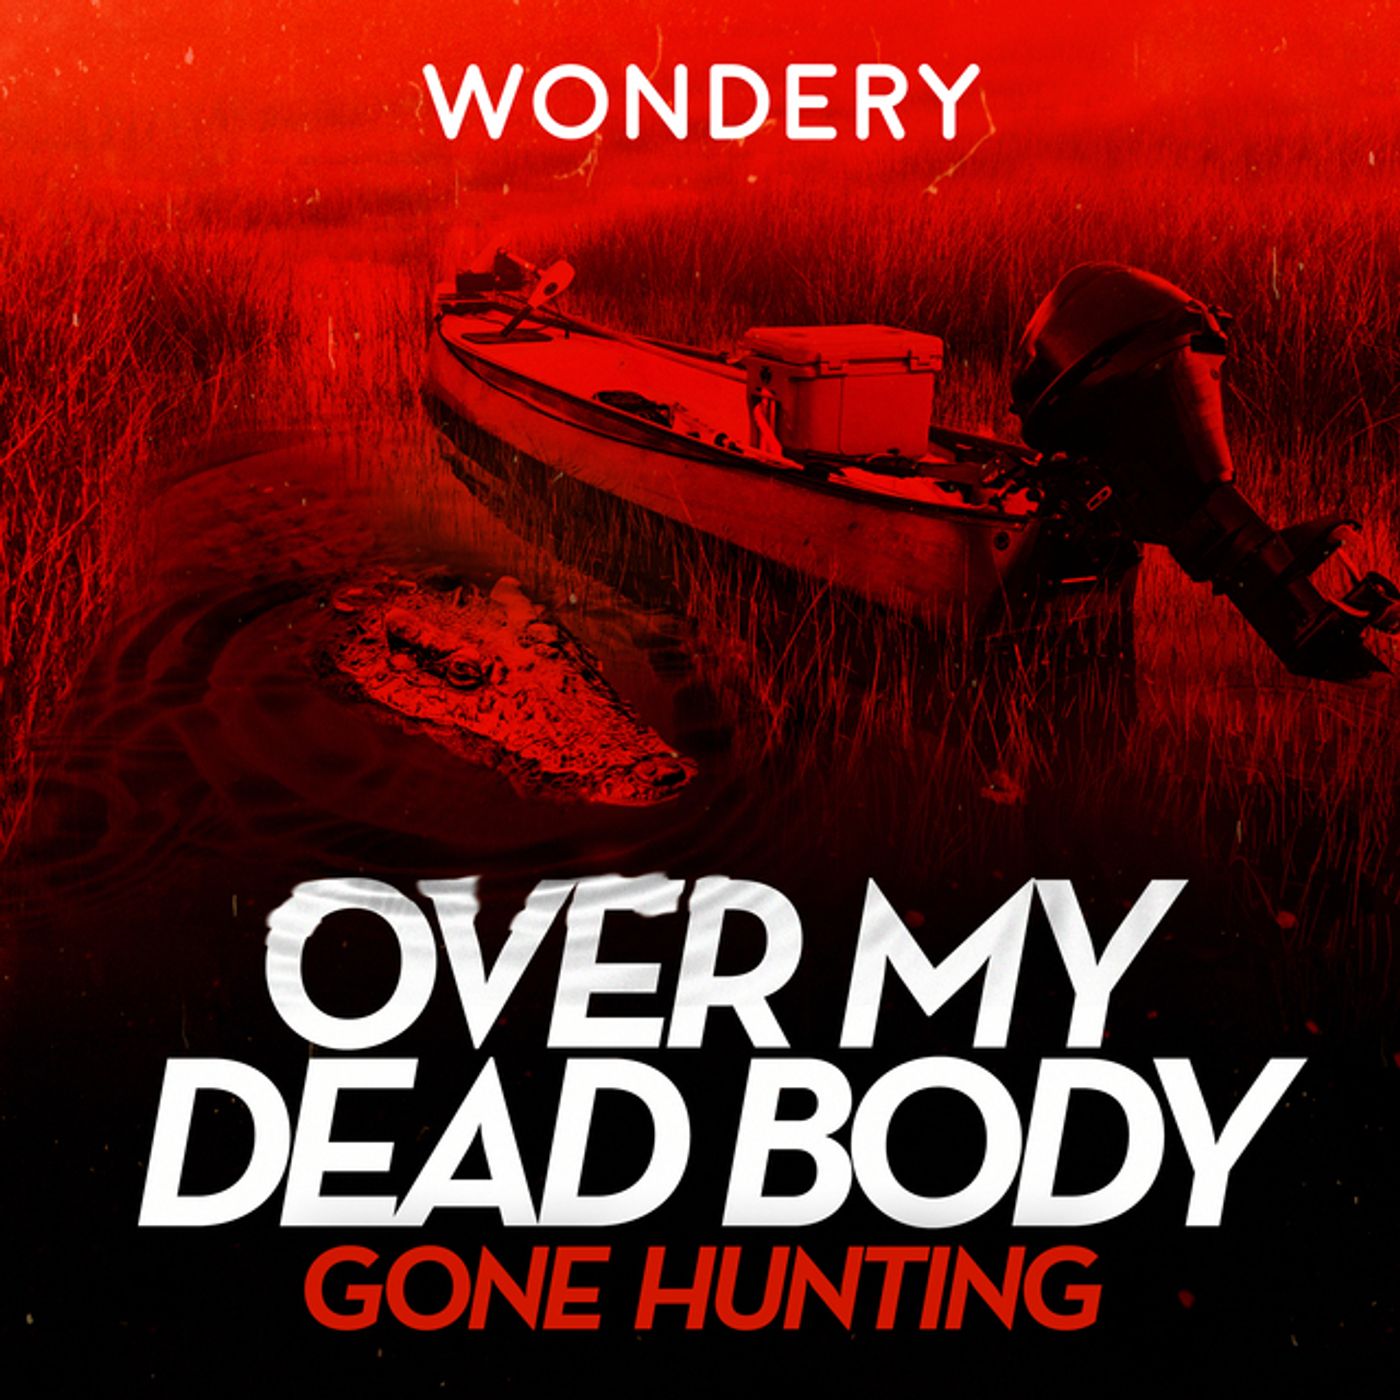 Listen Now - Over My Dead Body: Gone Hunting